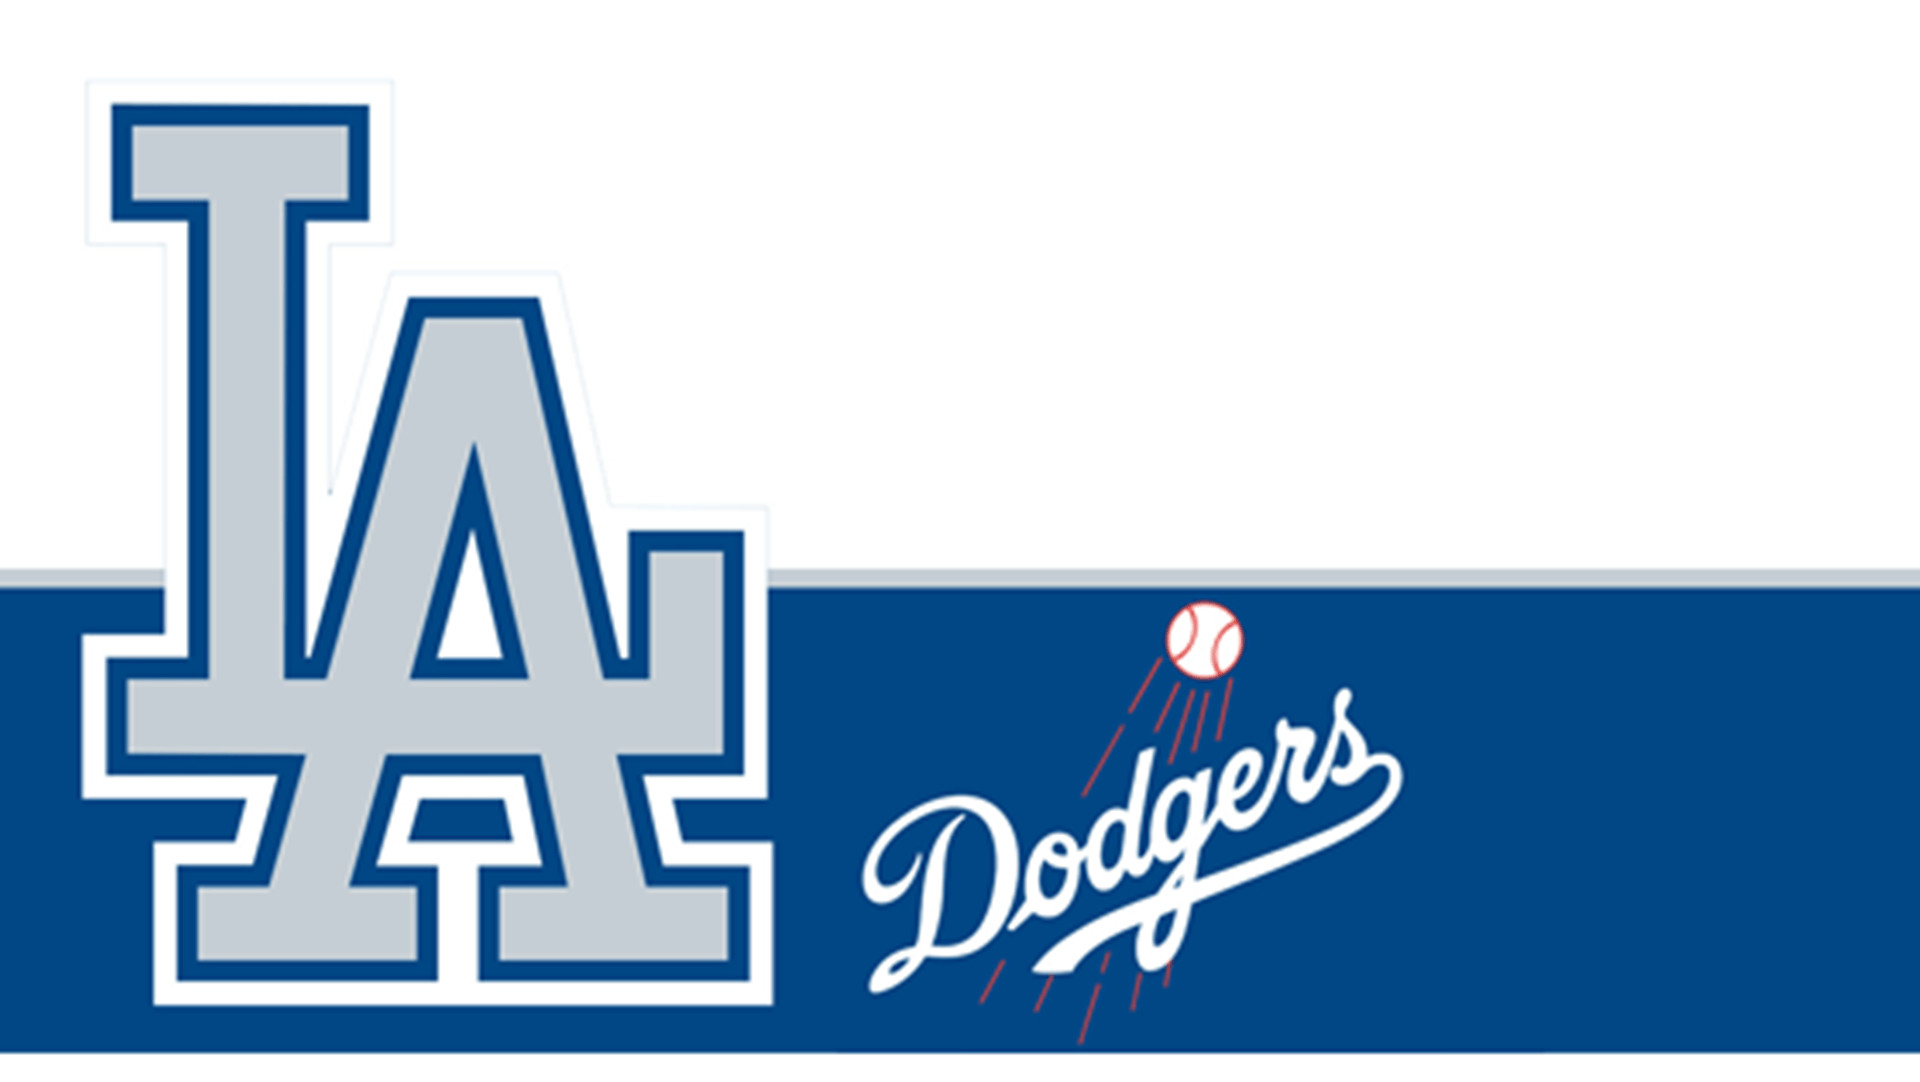 1920x1082 view image. Found on: dodgers-wallpapers